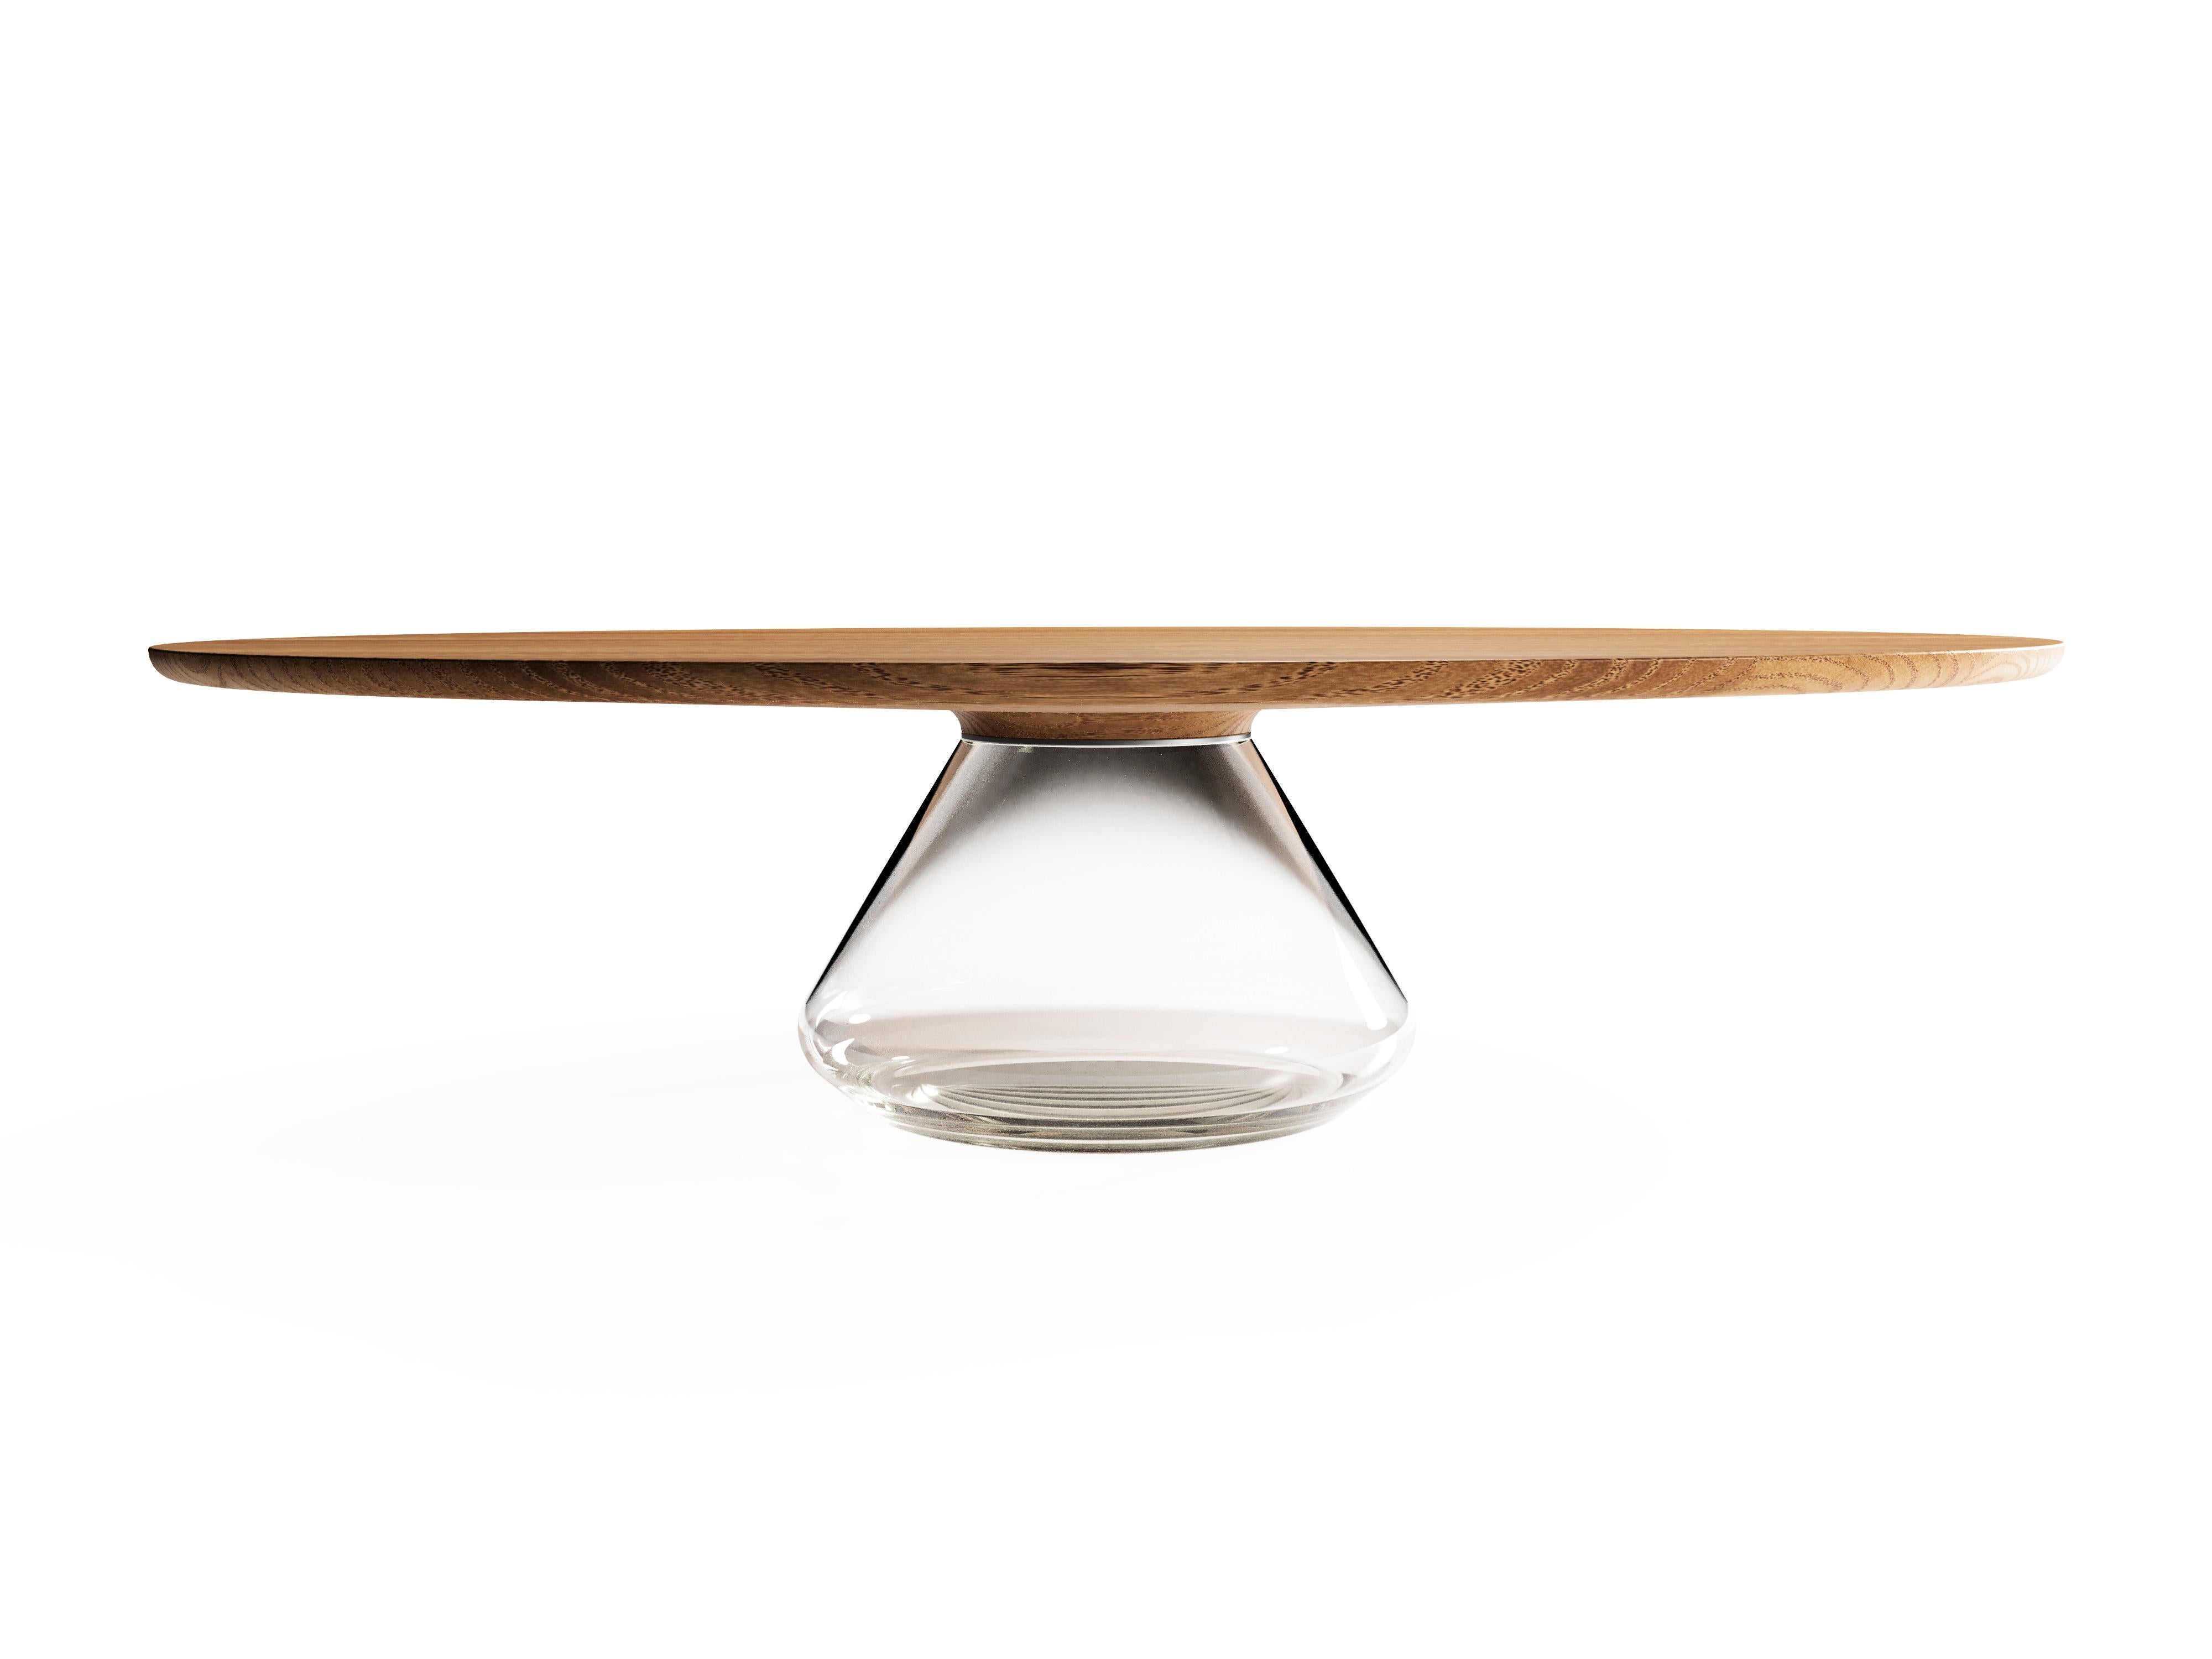 Contemporary The Eclipse I, Limited Edition Coffee Table by Grzegorz Majka